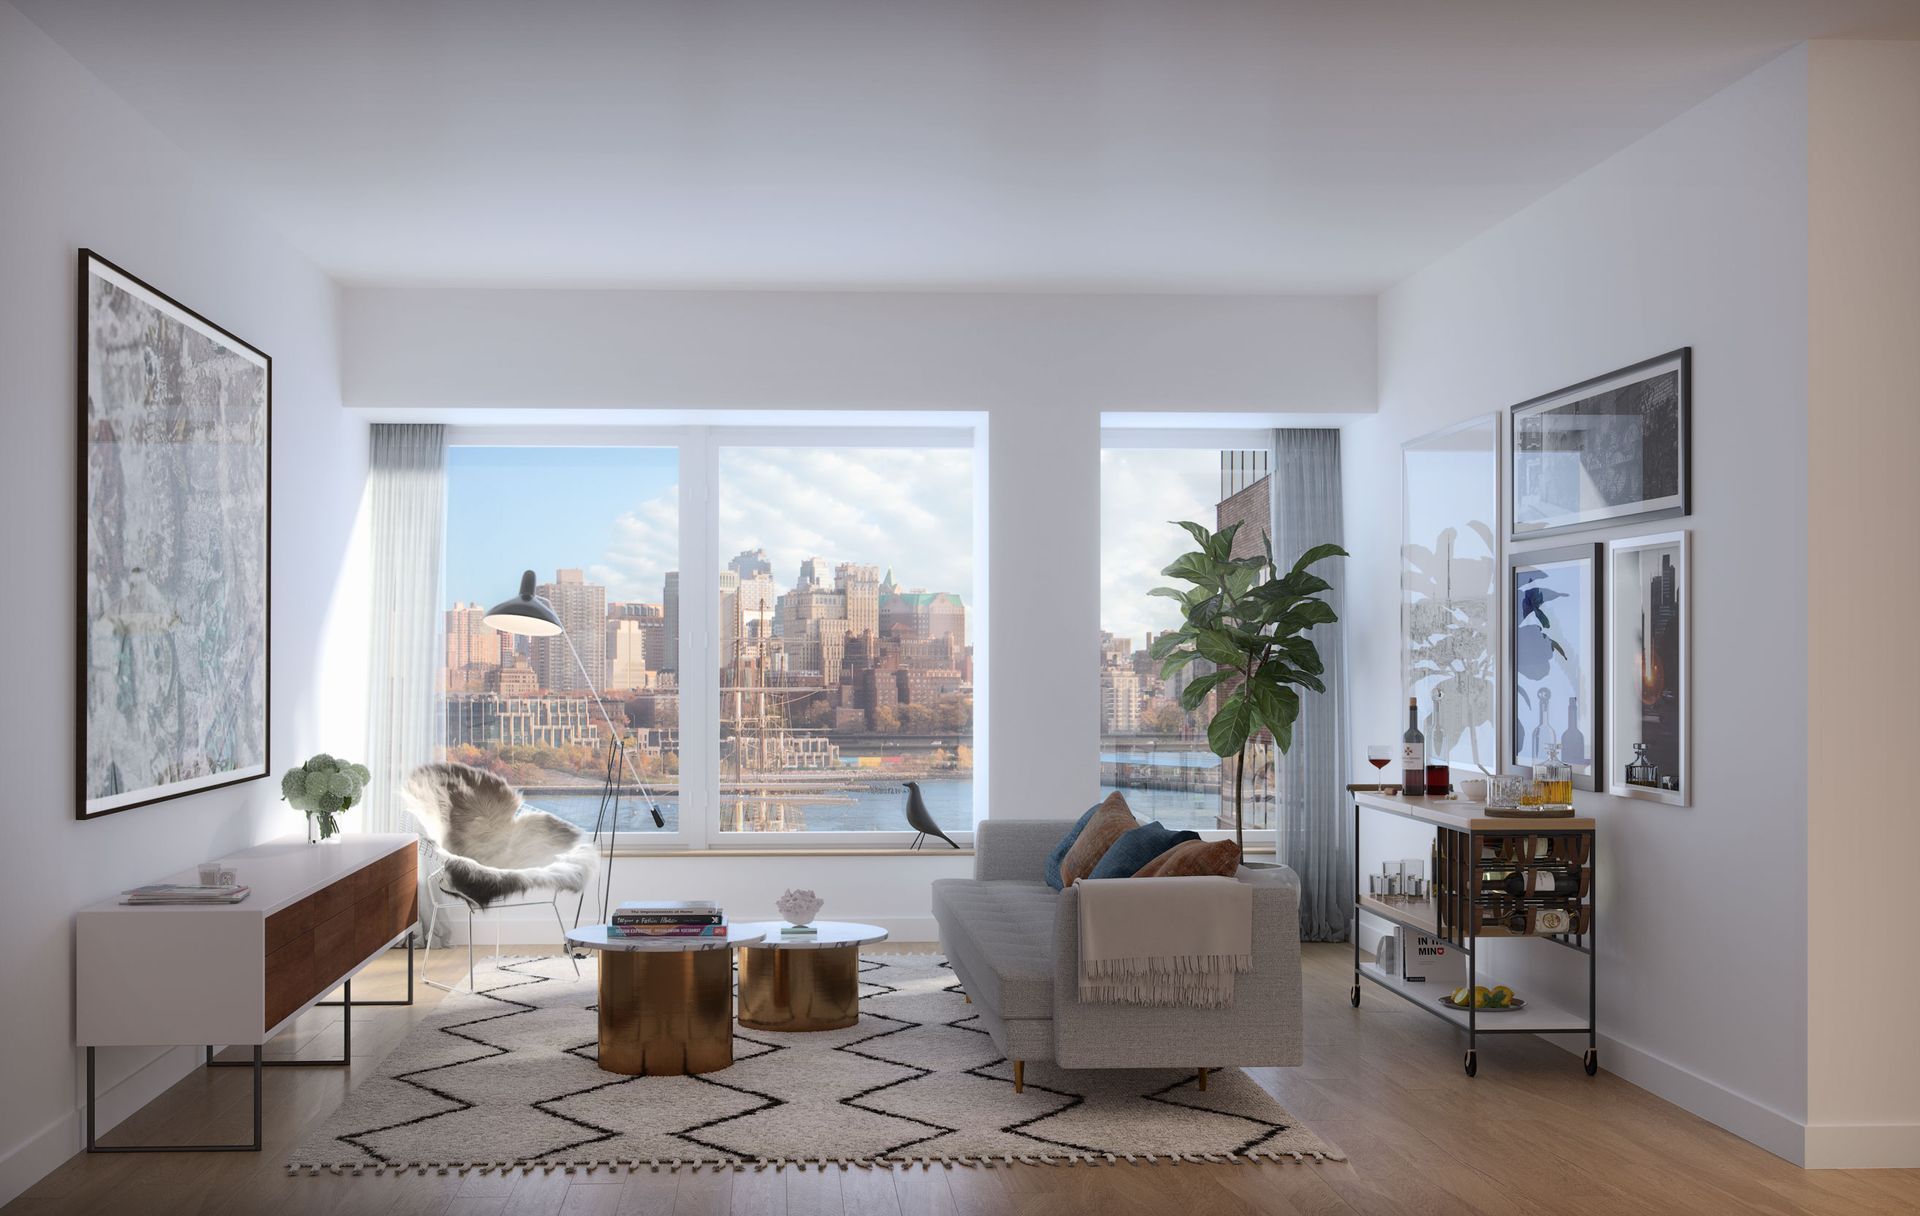 An artist 's impression of a living room with a view of the city